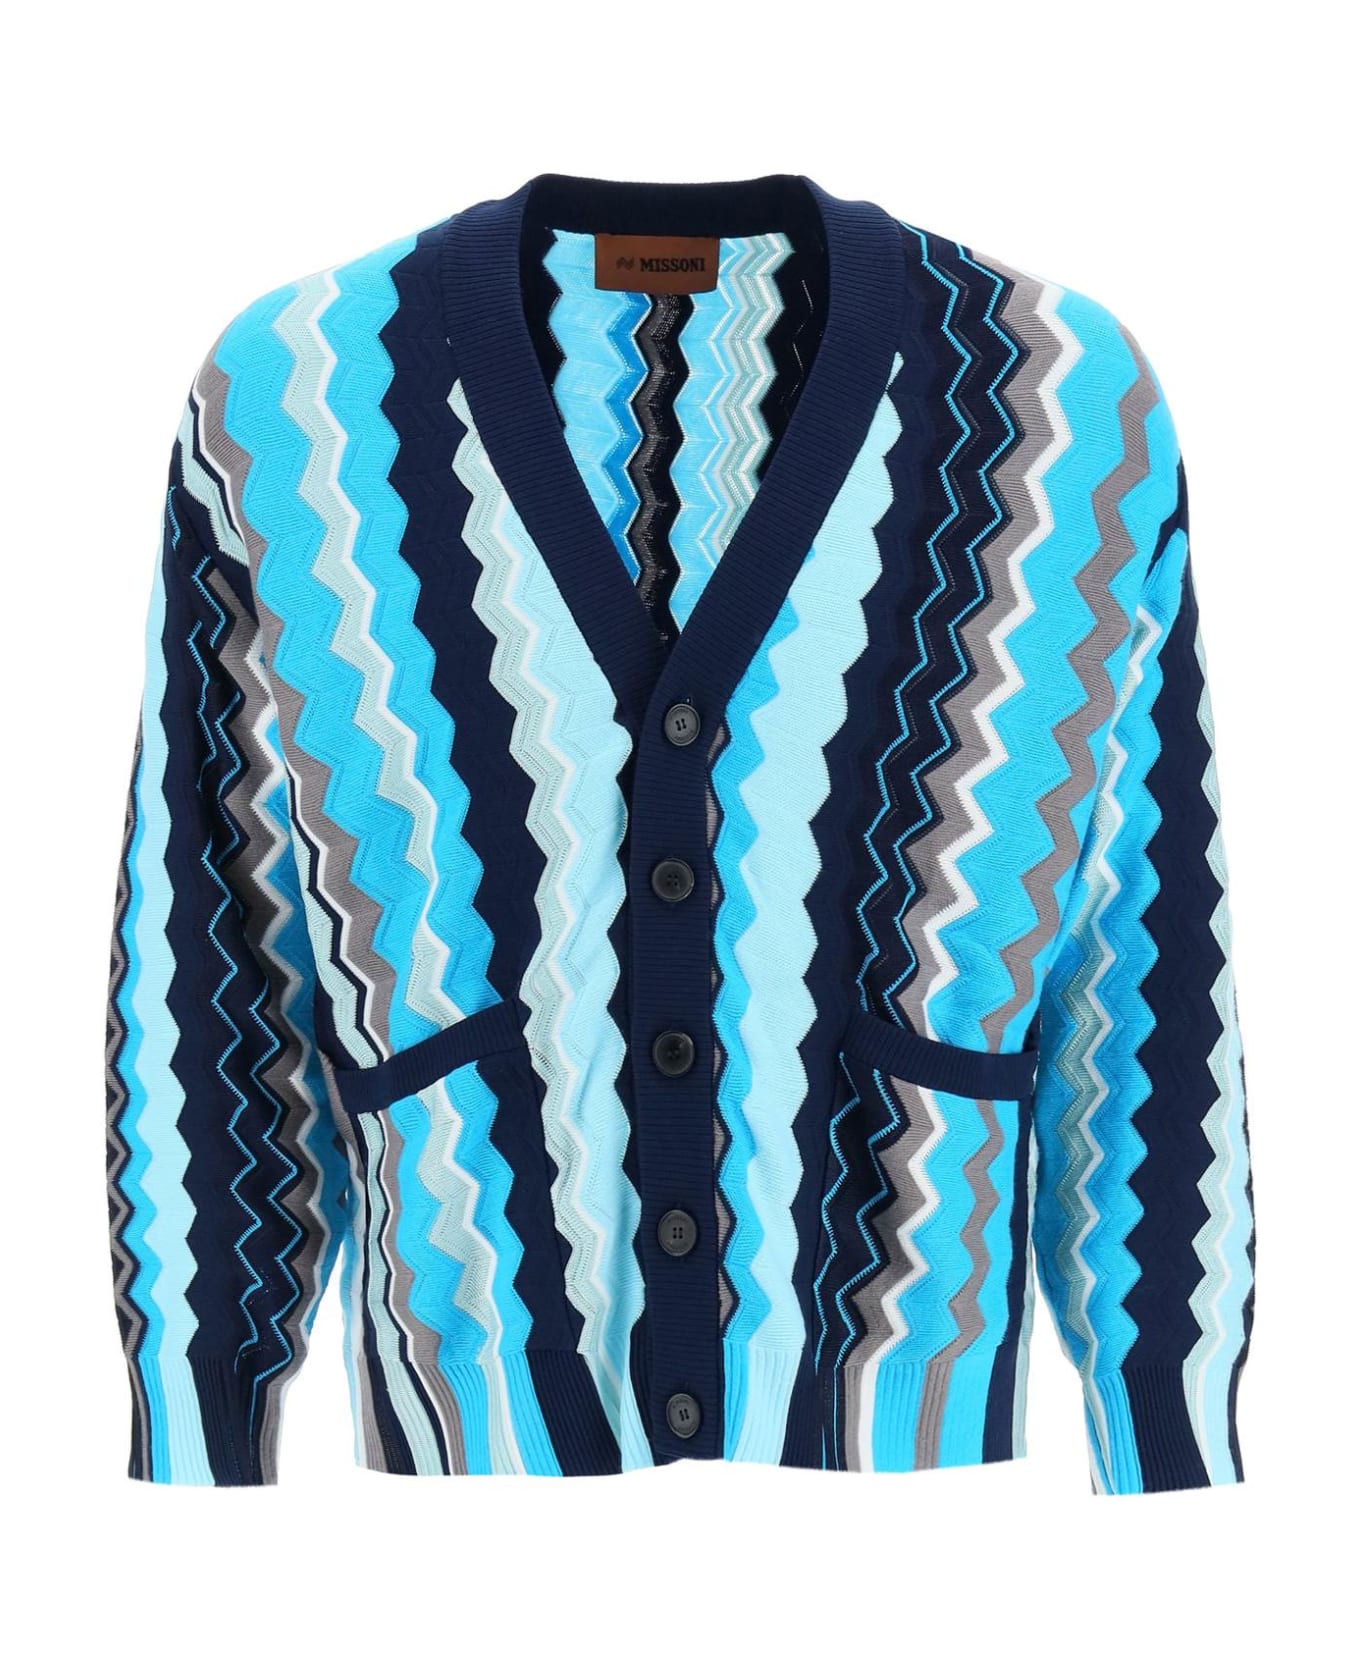 Missoni Patterned Cardigan - WHITE AND BLUE TONES (Blue)